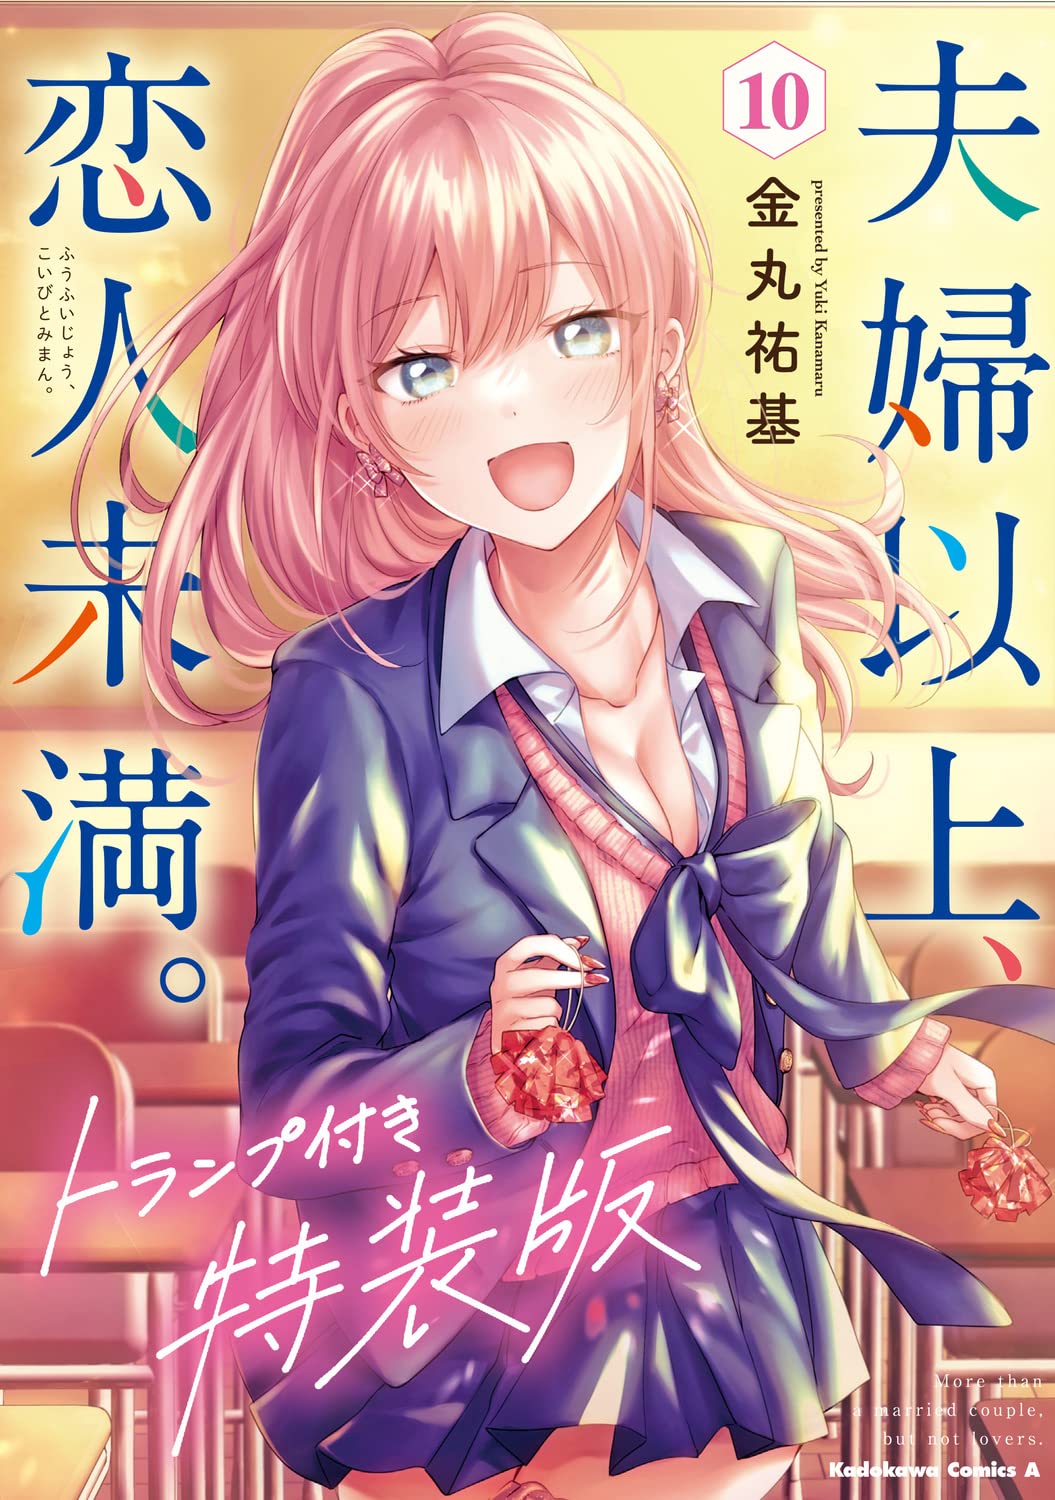 More Than a Married Couple, But Not Lovers (Fuufu Ijou, Koibito Miman.) 4 –  Japanese Book Store